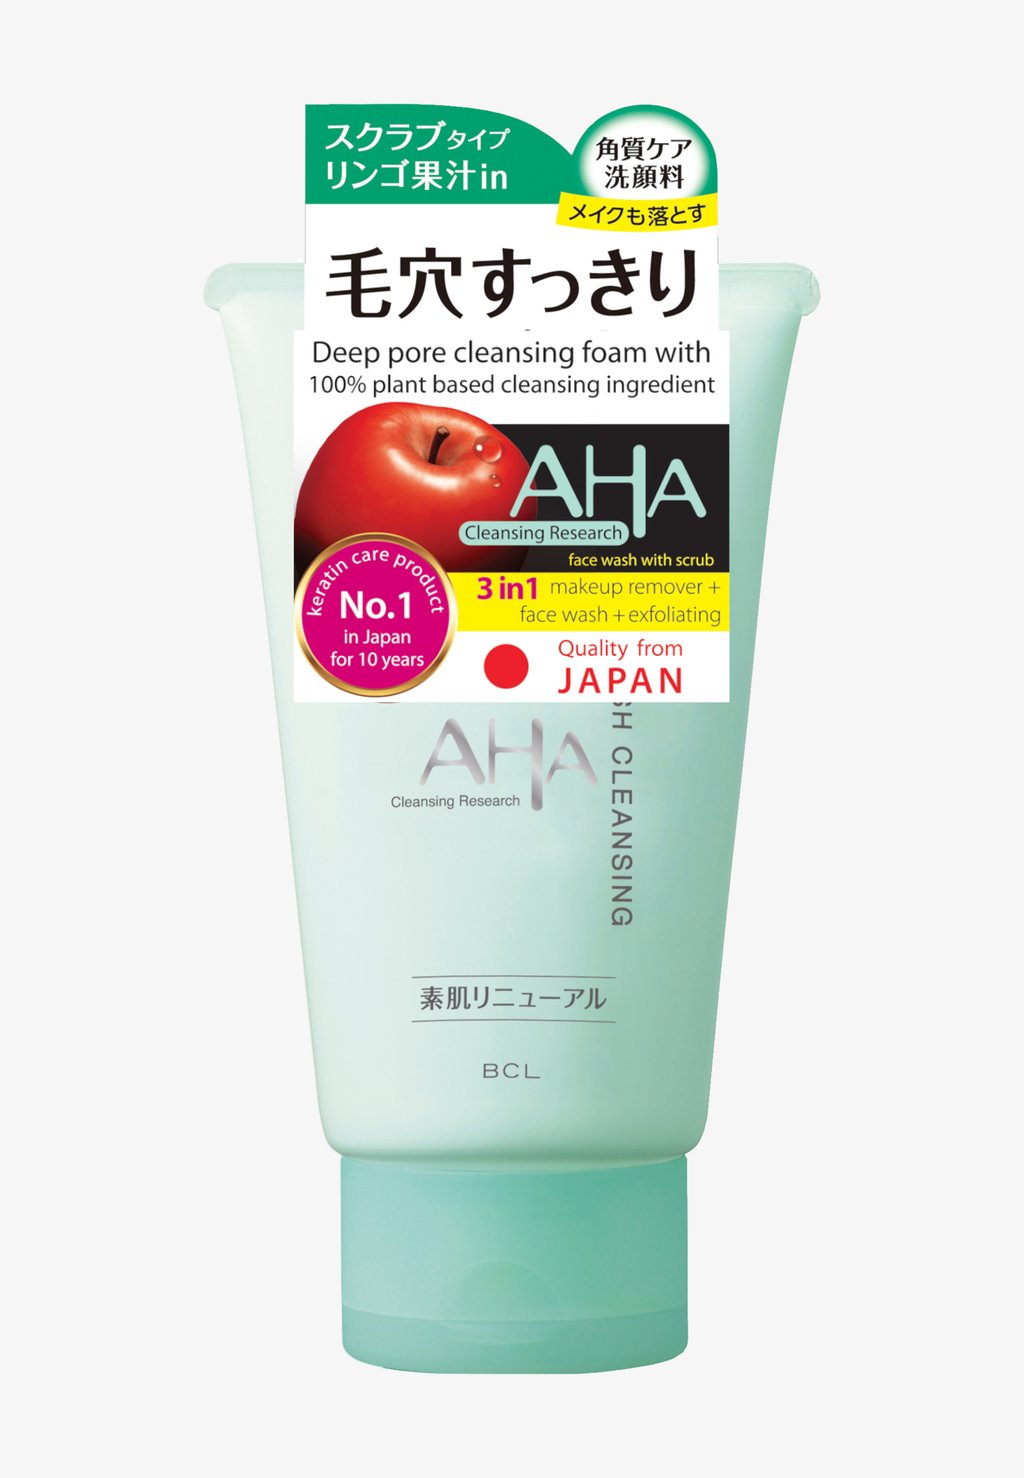 Скраб-пилинг для лица Aha Cleansing Research Wash Cleansing And (Scrubbing) AHA Cleansing Research фотографии